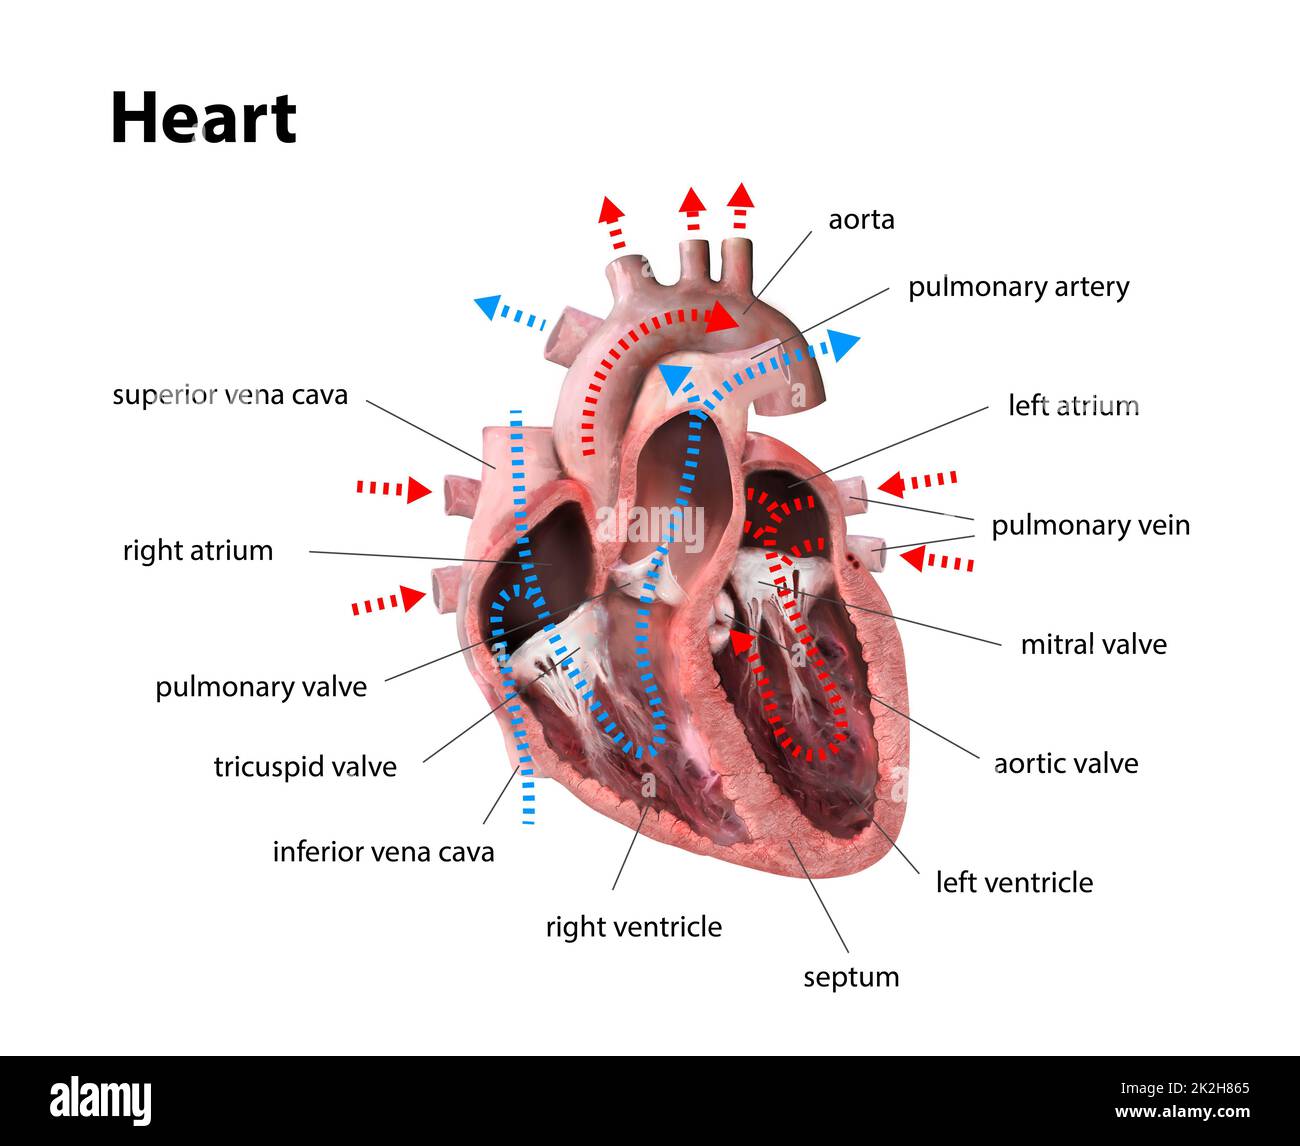 human heart anatomy. Educational diagram showing blood flow with main parts labeled. illustration 3d render Stock Photo